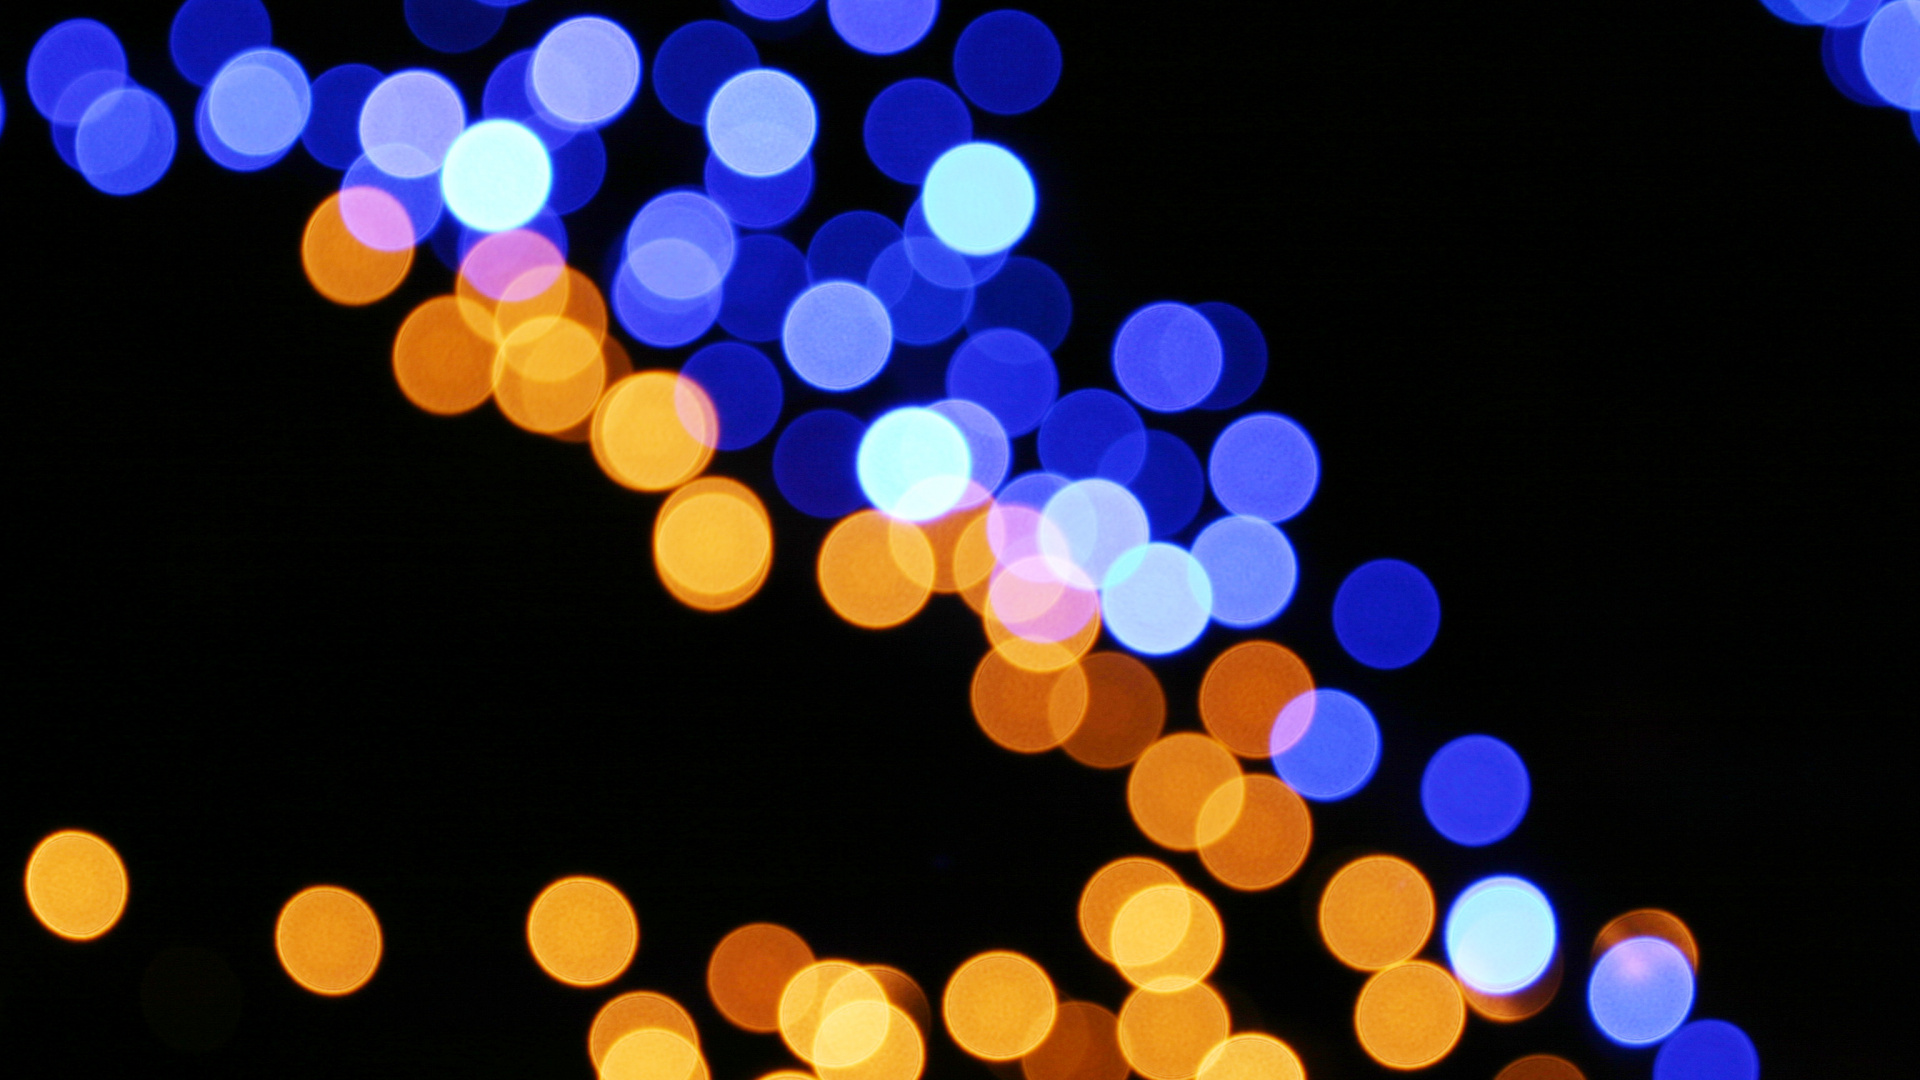 Blue and White Bokeh Lights. Wallpaper in 1920x1080 Resolution